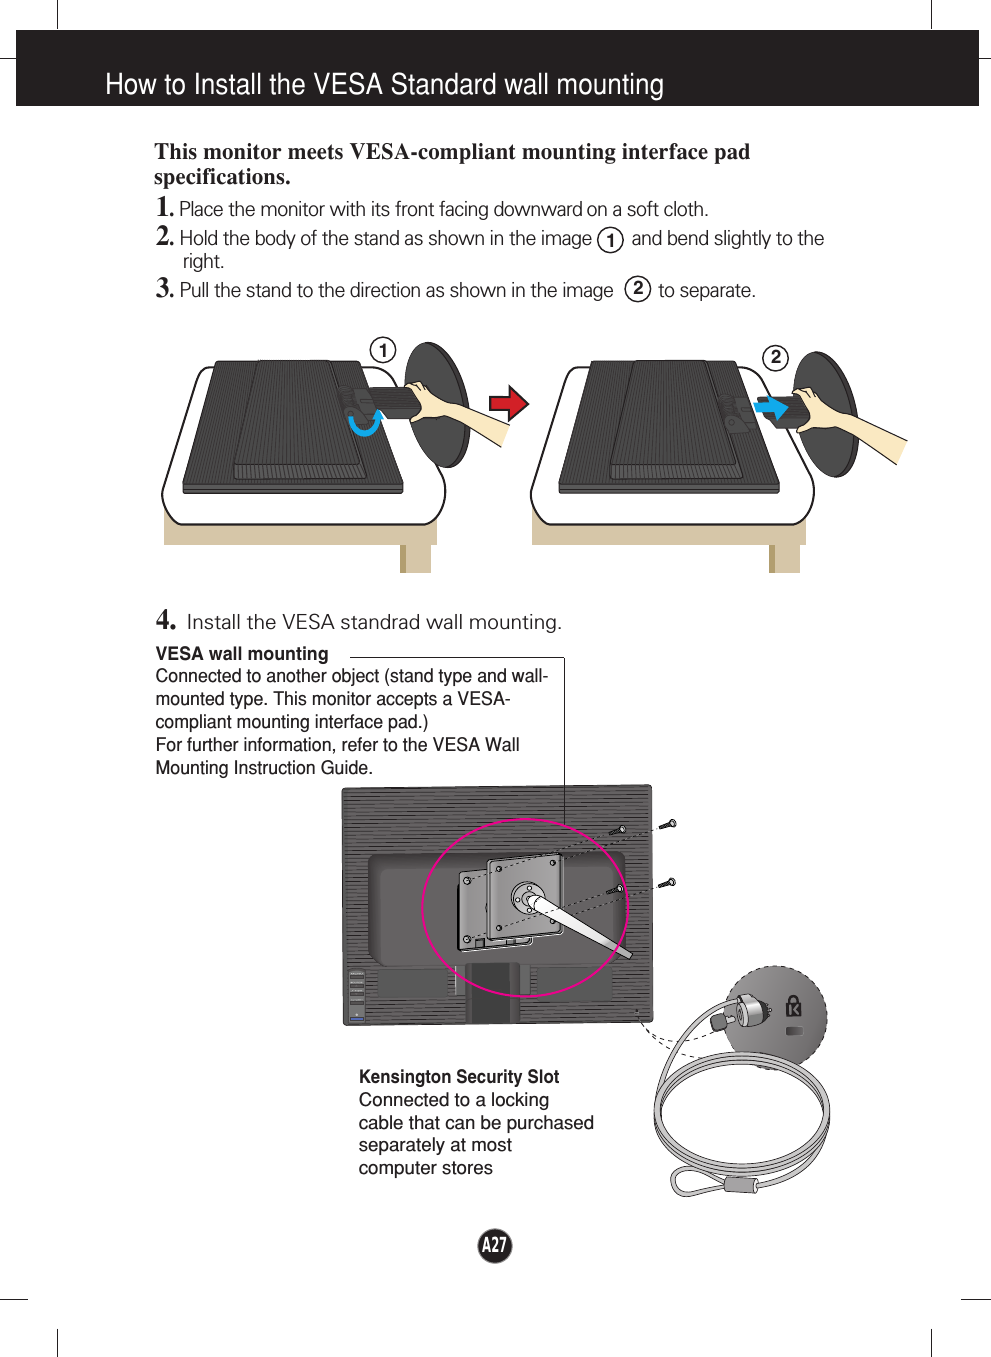 How to Install the VESA Standard wall mountingVESA wall mountingConnected to another object (stand type and wall-mounted type. This monitor accepts a VESA-compliant mounting interface pad.)For further information, refer to the VESA WallMounting Instruction Guide.Kensington Security SlotConnected to a locking cable that can be purchasedseparately at most computer storesThis monitor meets VESA-compliant mounting interface padspecifications.1. Place the monitor with its front facing downward on a soft cloth.2.Hold the body of the stand as shown in the image        and bend slightly to theright.3.Pull the stand to the direction as shown in the image         to separate.4.Install the VESA standrad wall mounting.REARREARFRONTFRONTREARREARREARFRONTFRONTREAR2211A27